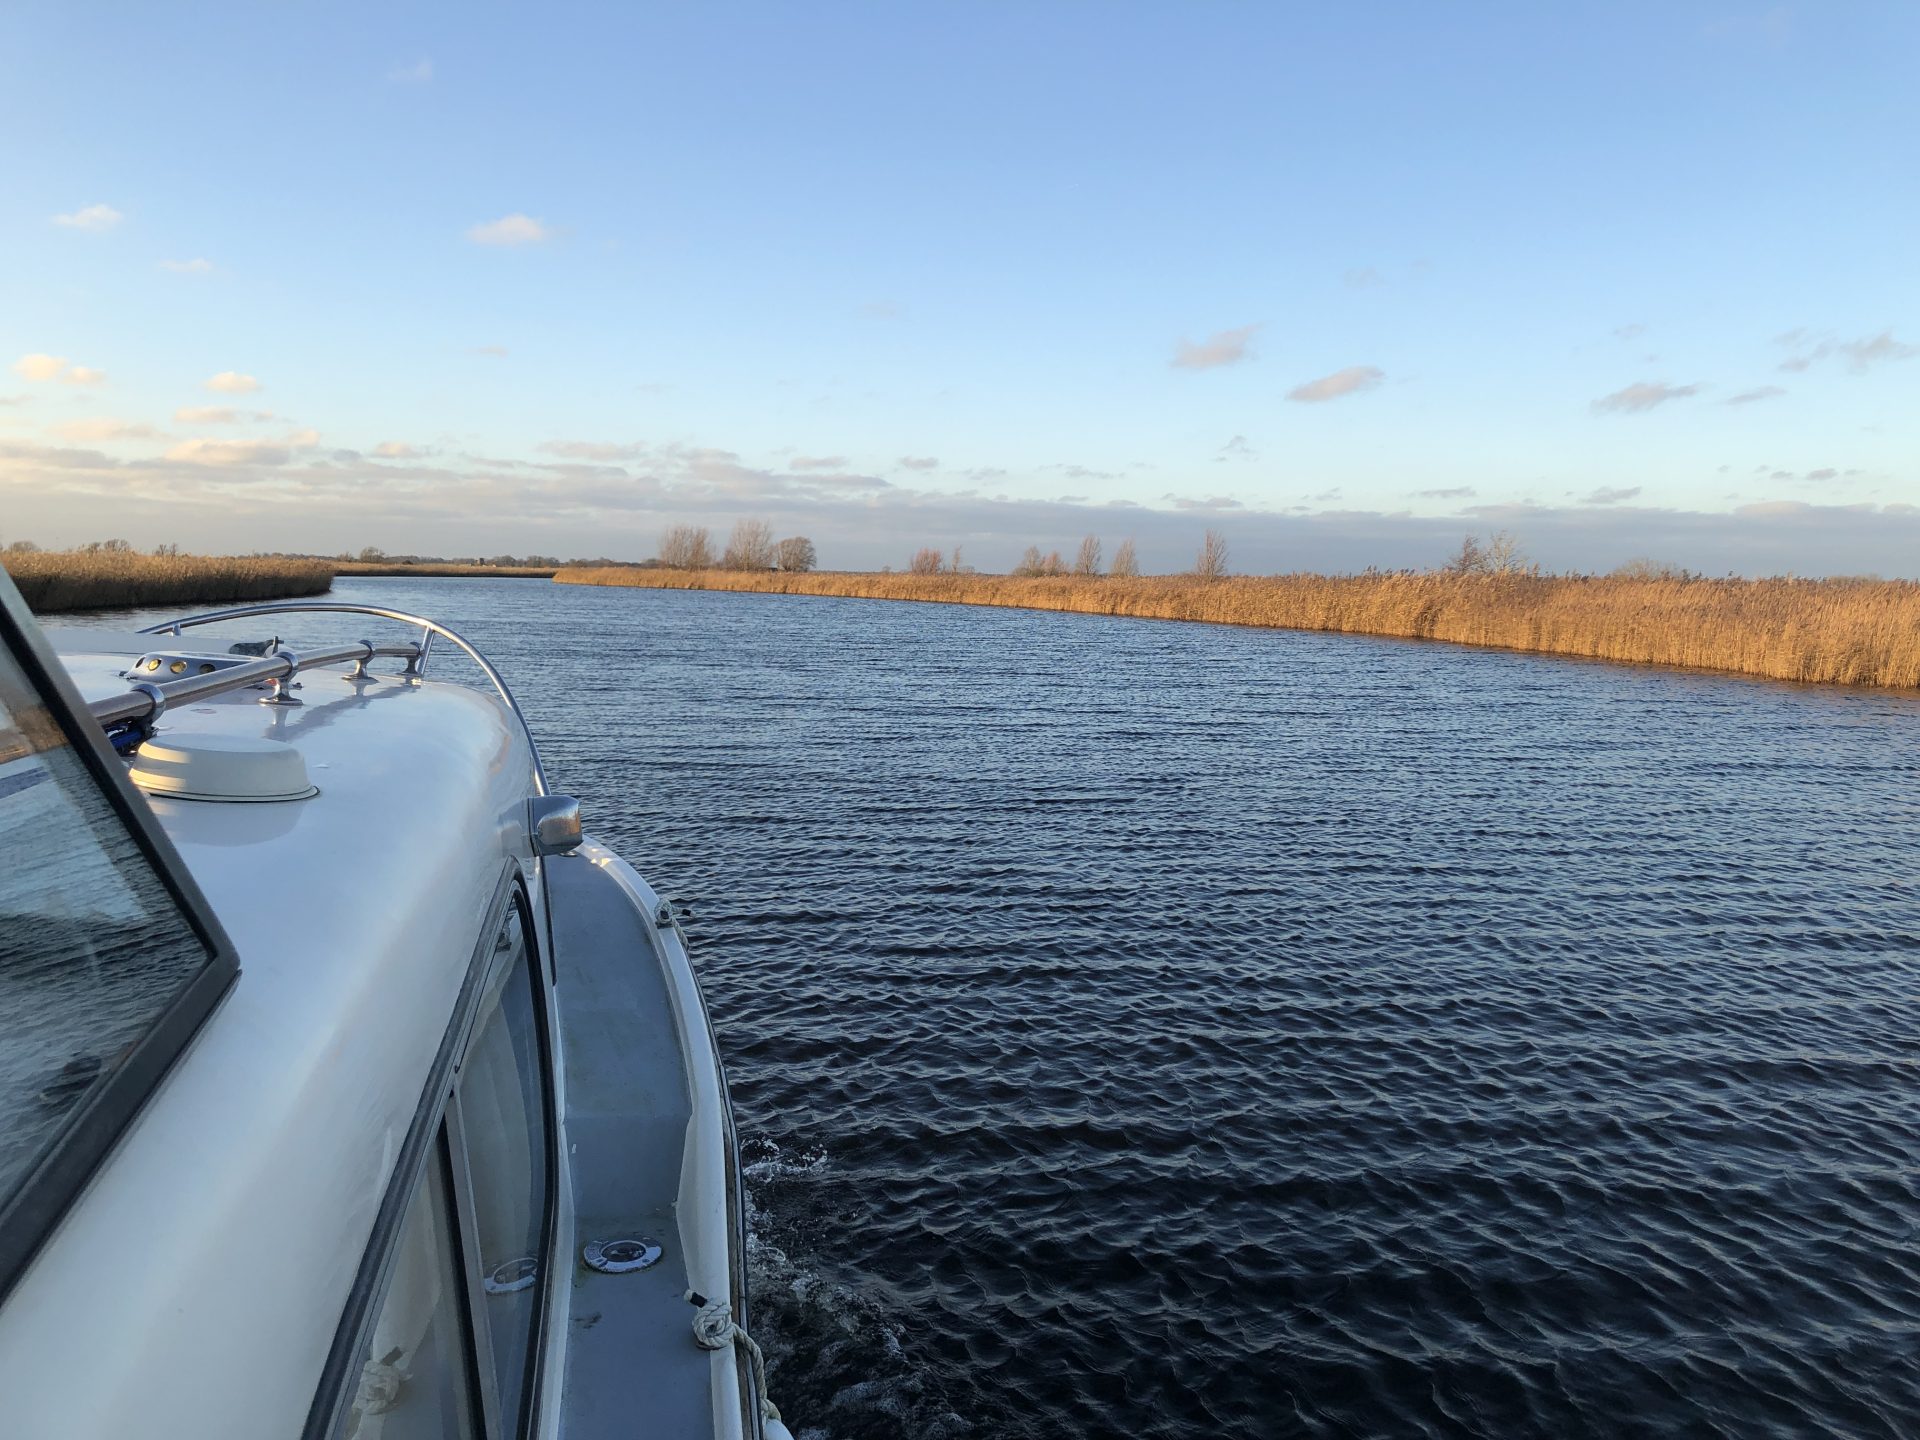 The Bure approaching St Benets